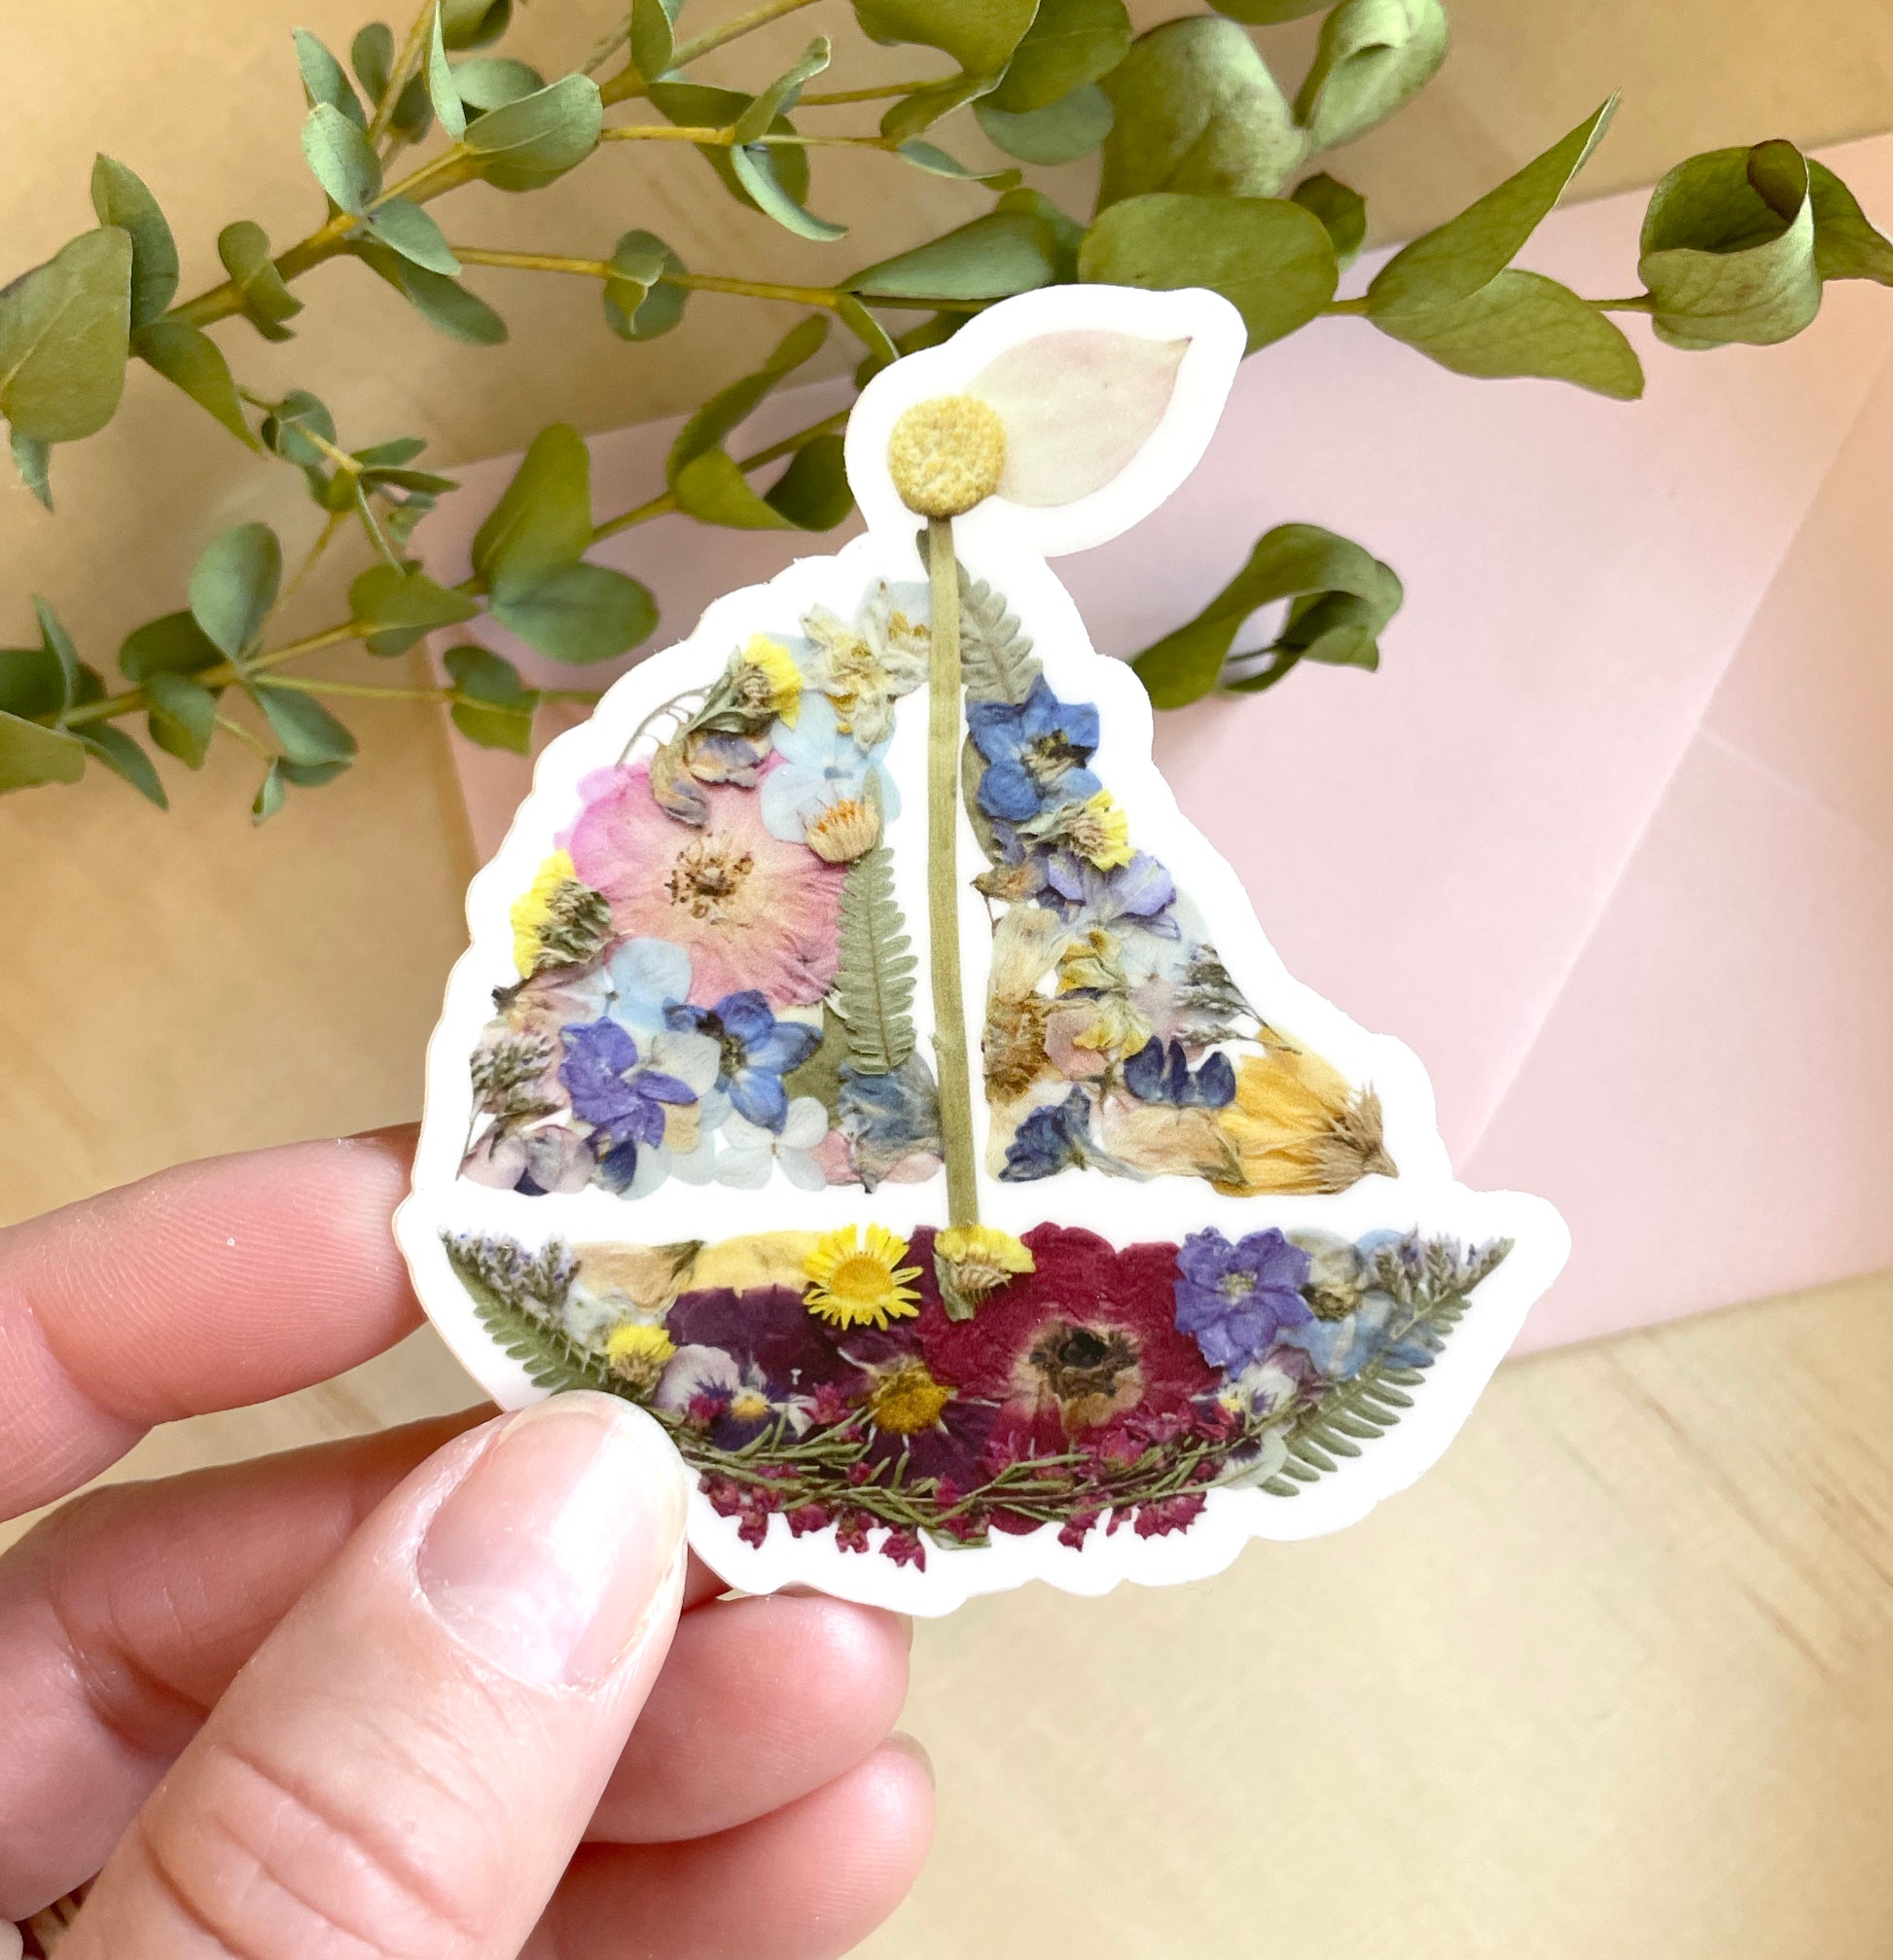 sticker of sailboat art made with colourful dried pressed flowers.